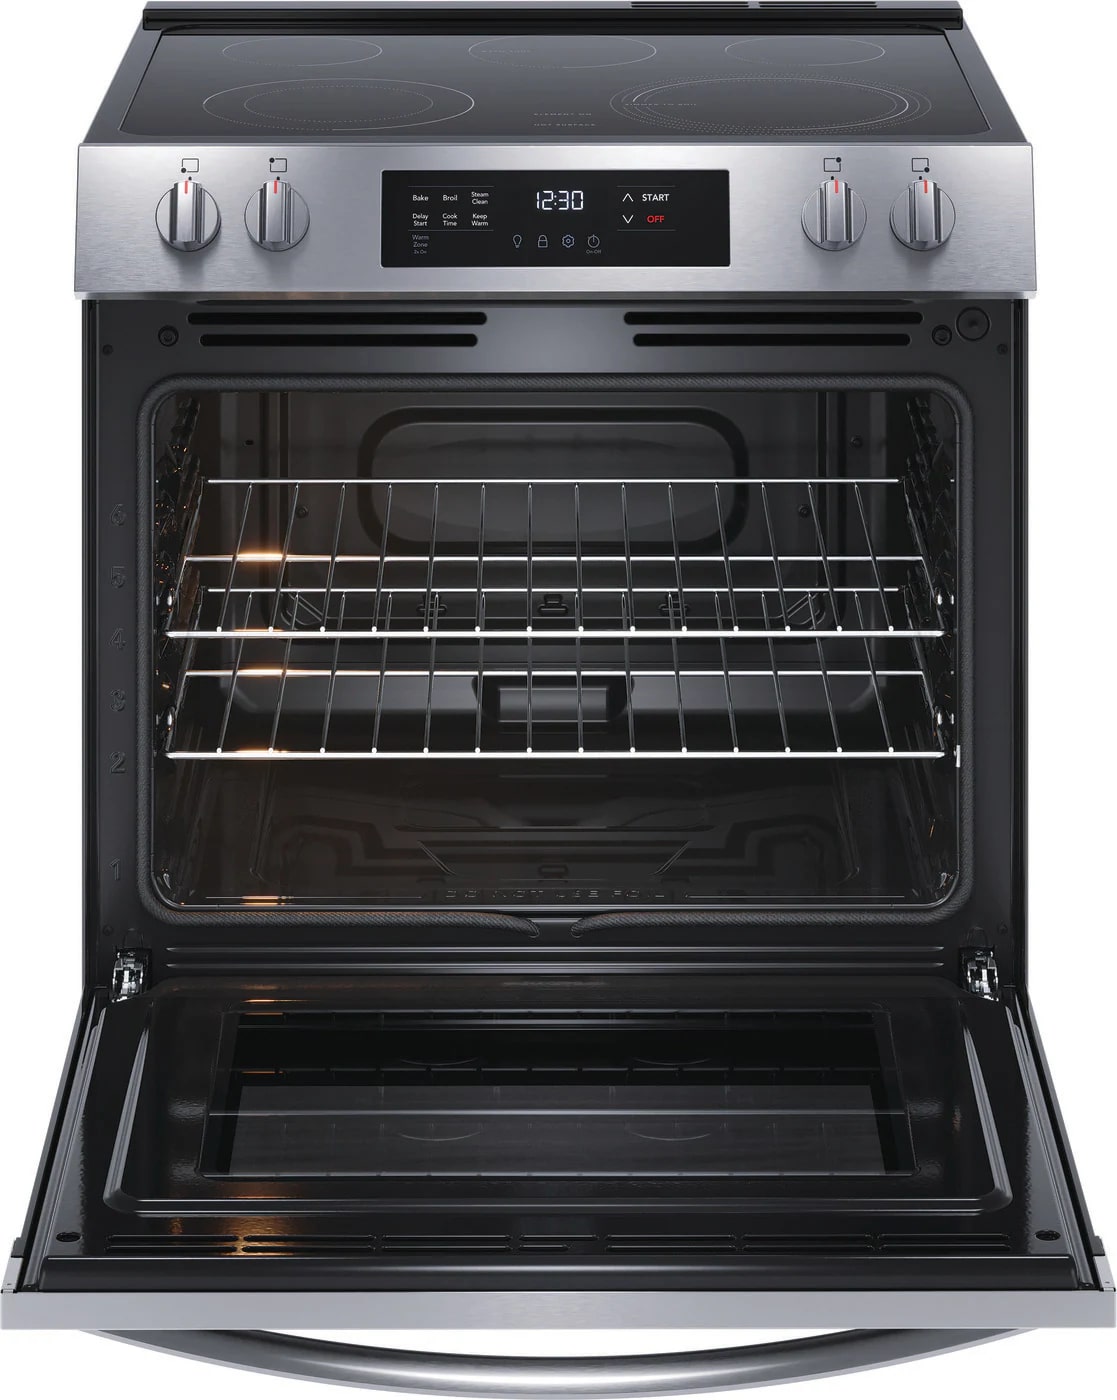 Frigidaire - 5.3 cu. ft  Electric Range in Stainless - FCFE306CAS